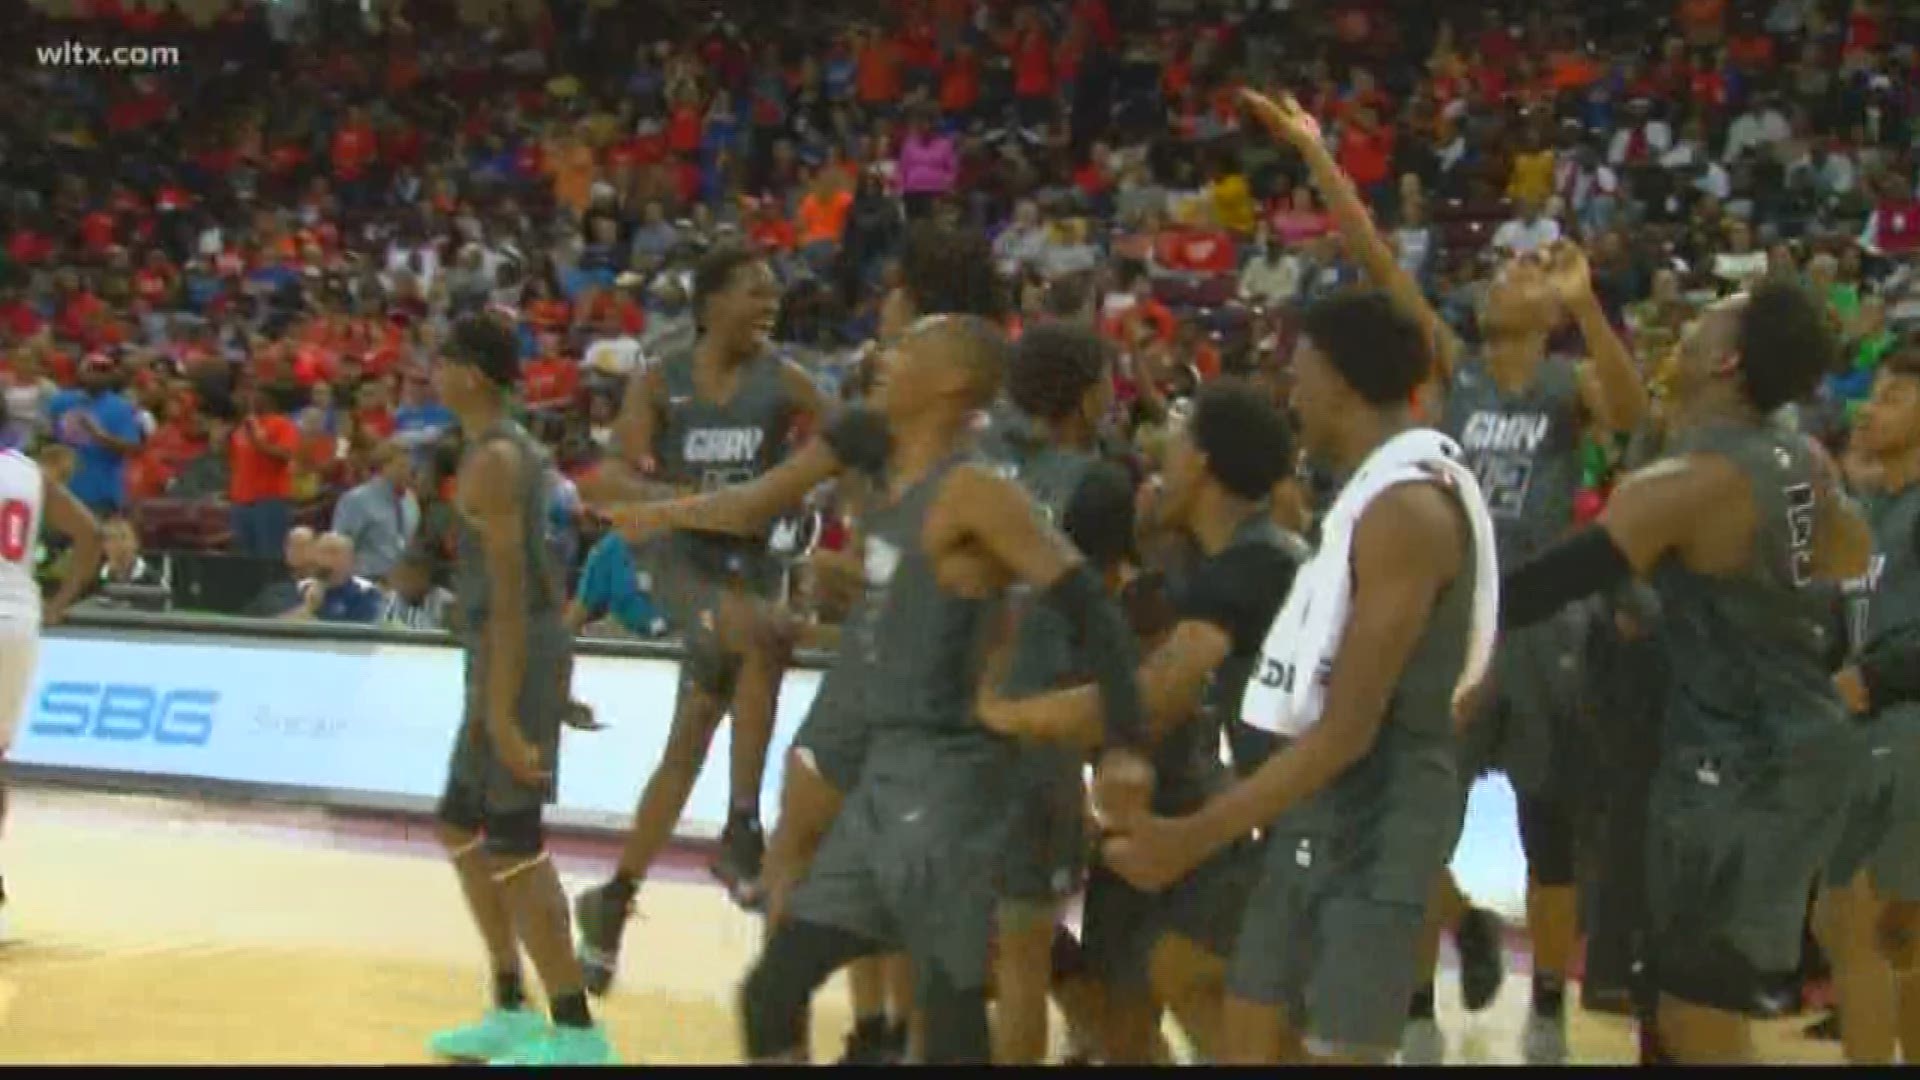 The War Eagles were too much for Andrew Jackson. A 79-38 win over the Vols gives Gray Collegiate their 2nd state title in 2A.